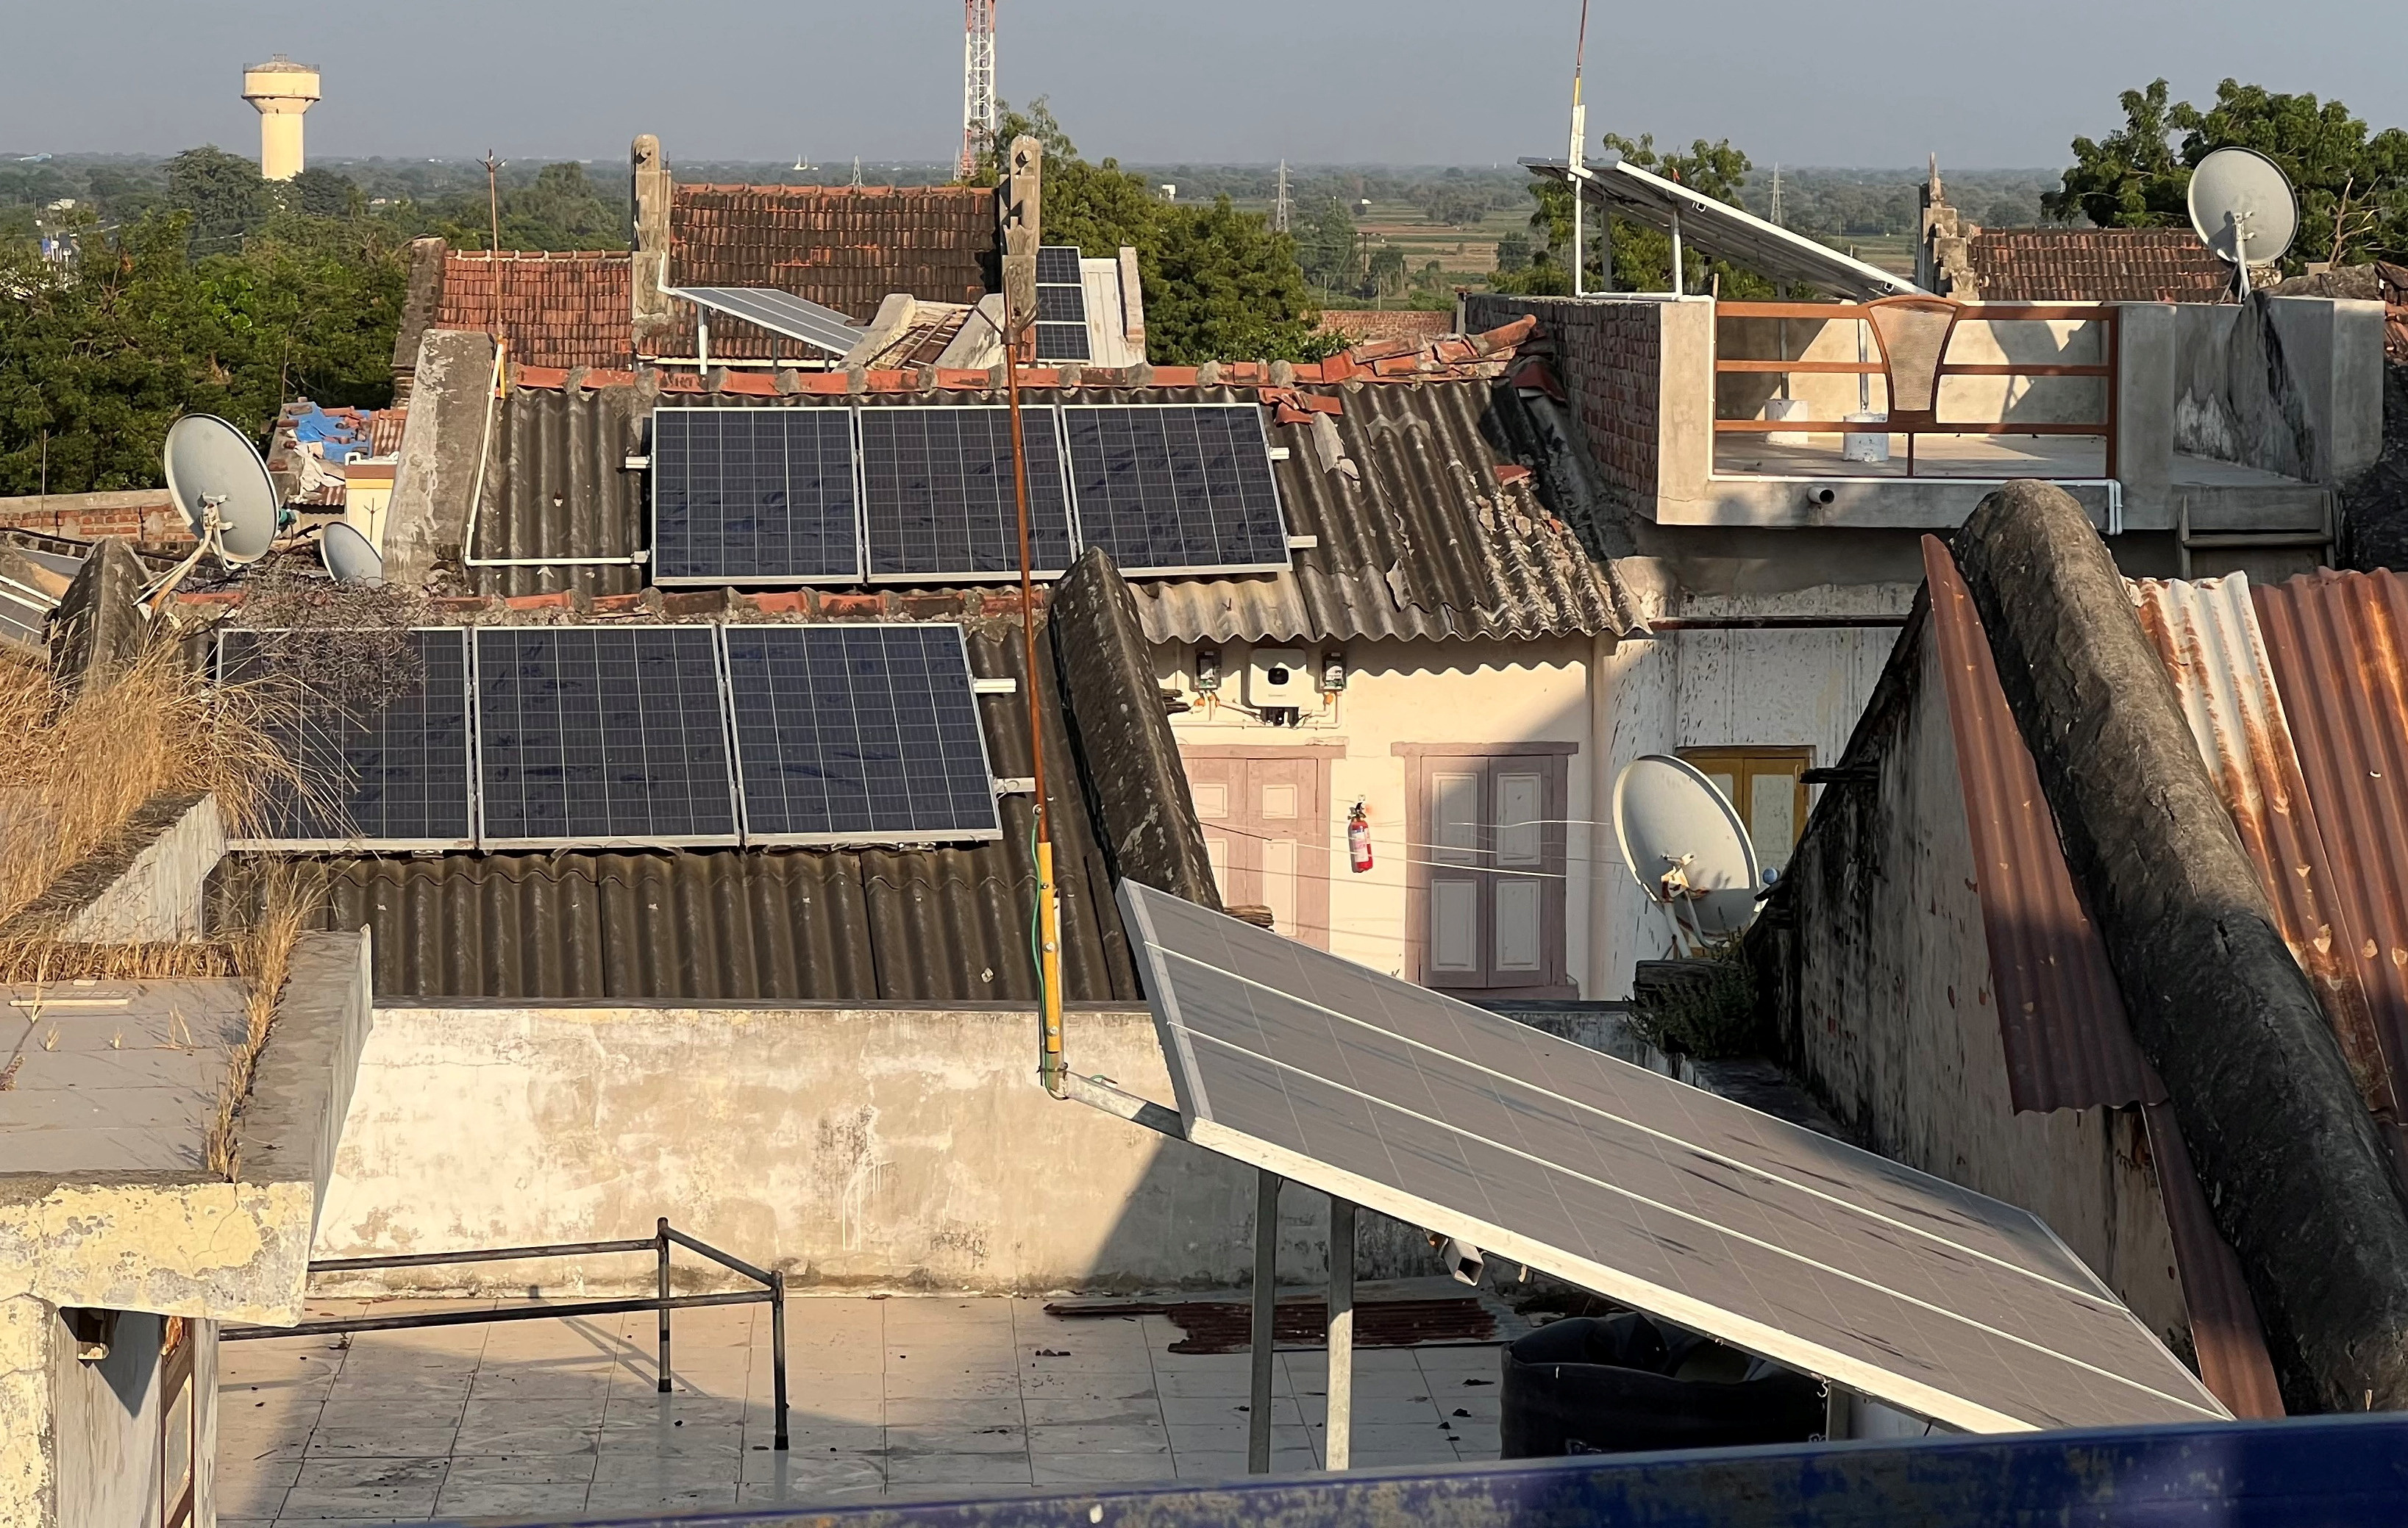 Solar panels are installed on the rooftops of residential houses in Modhera